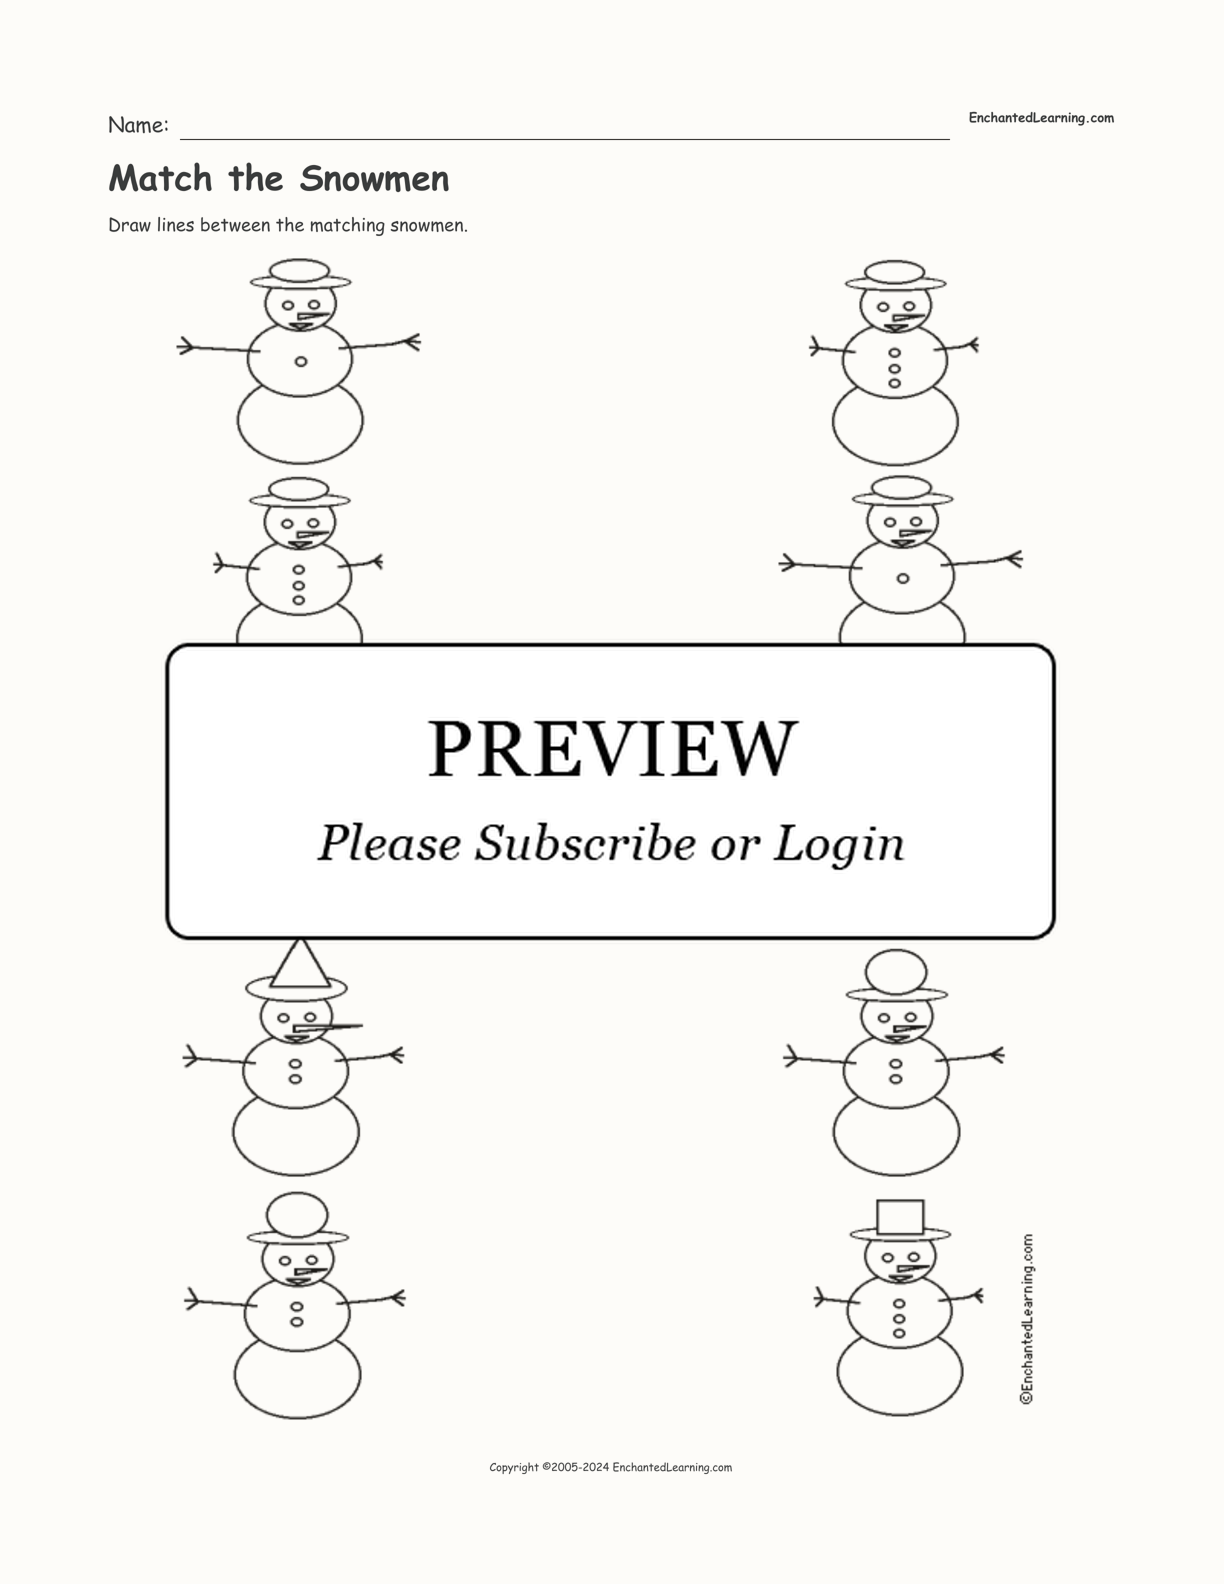 match-the-snowmen-enchanted-learning